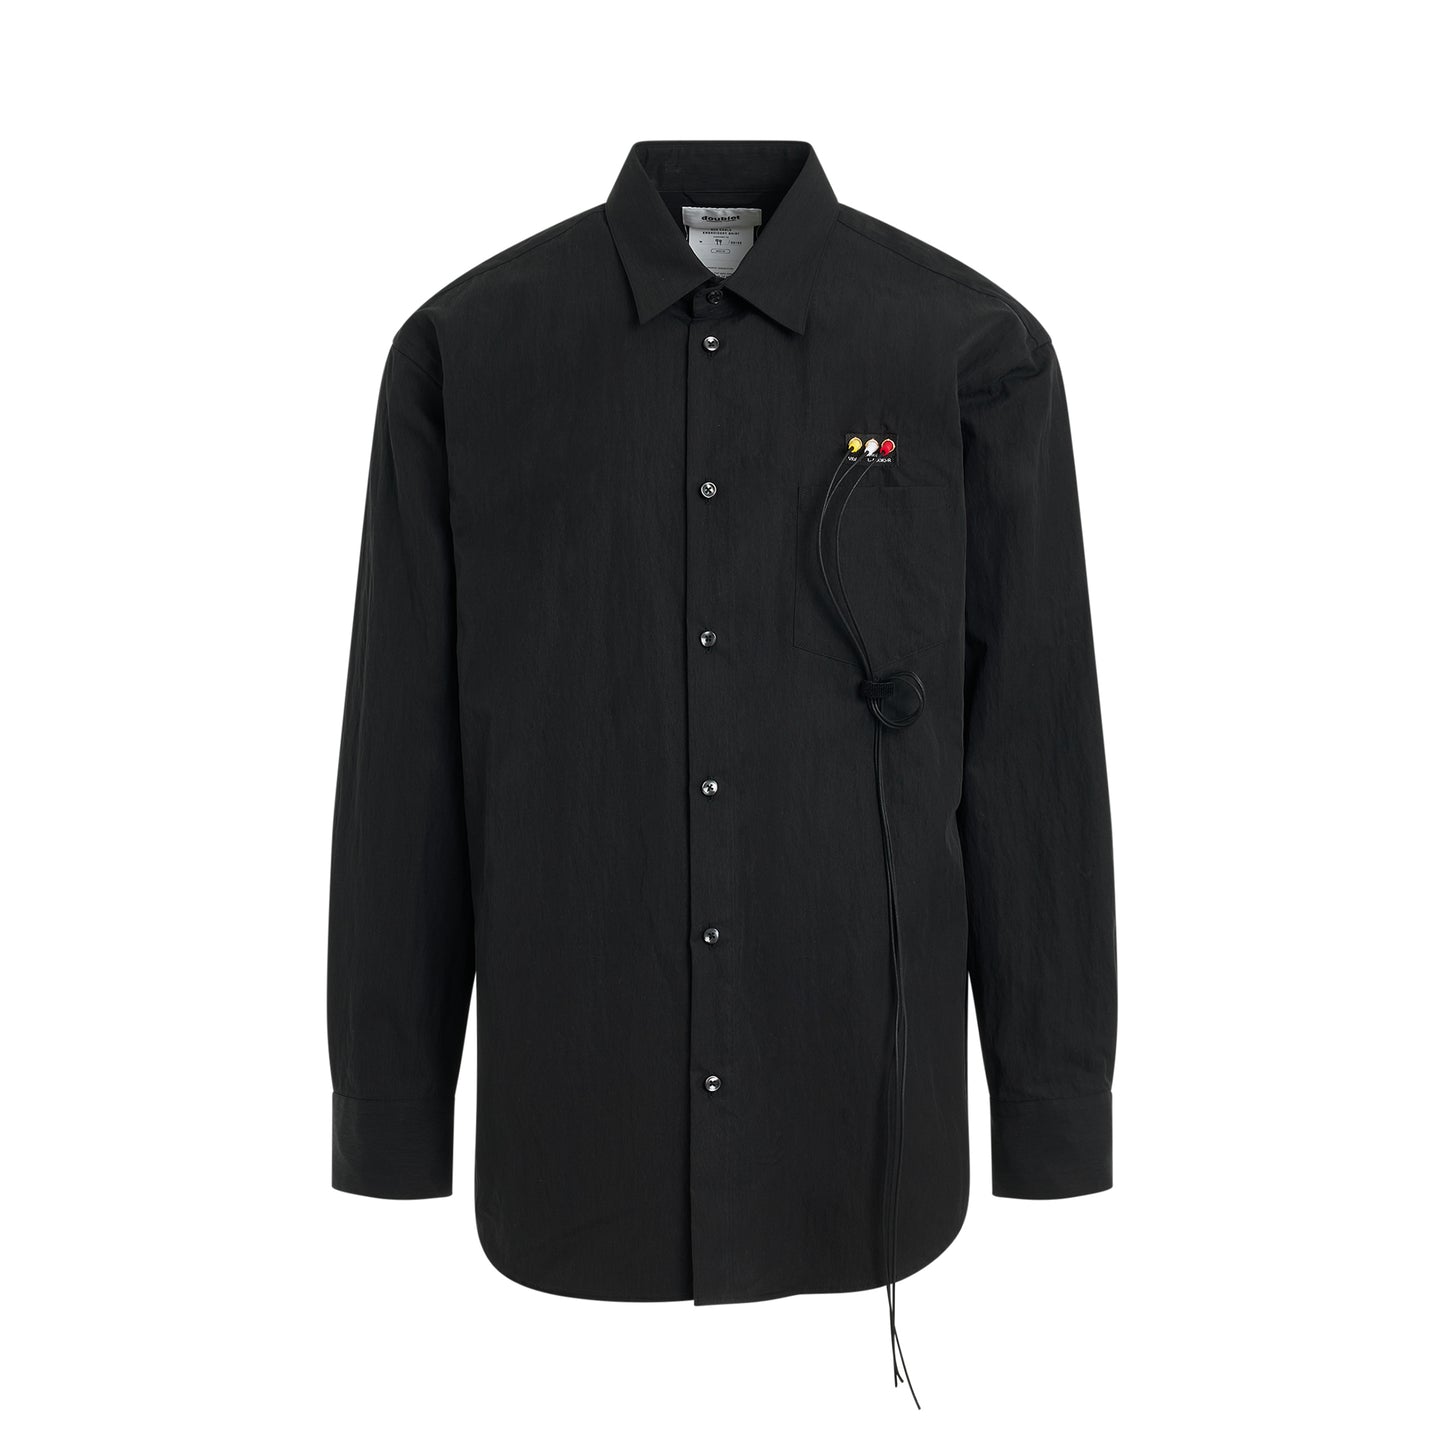 RCA Cable Embroidery Shirt in Black